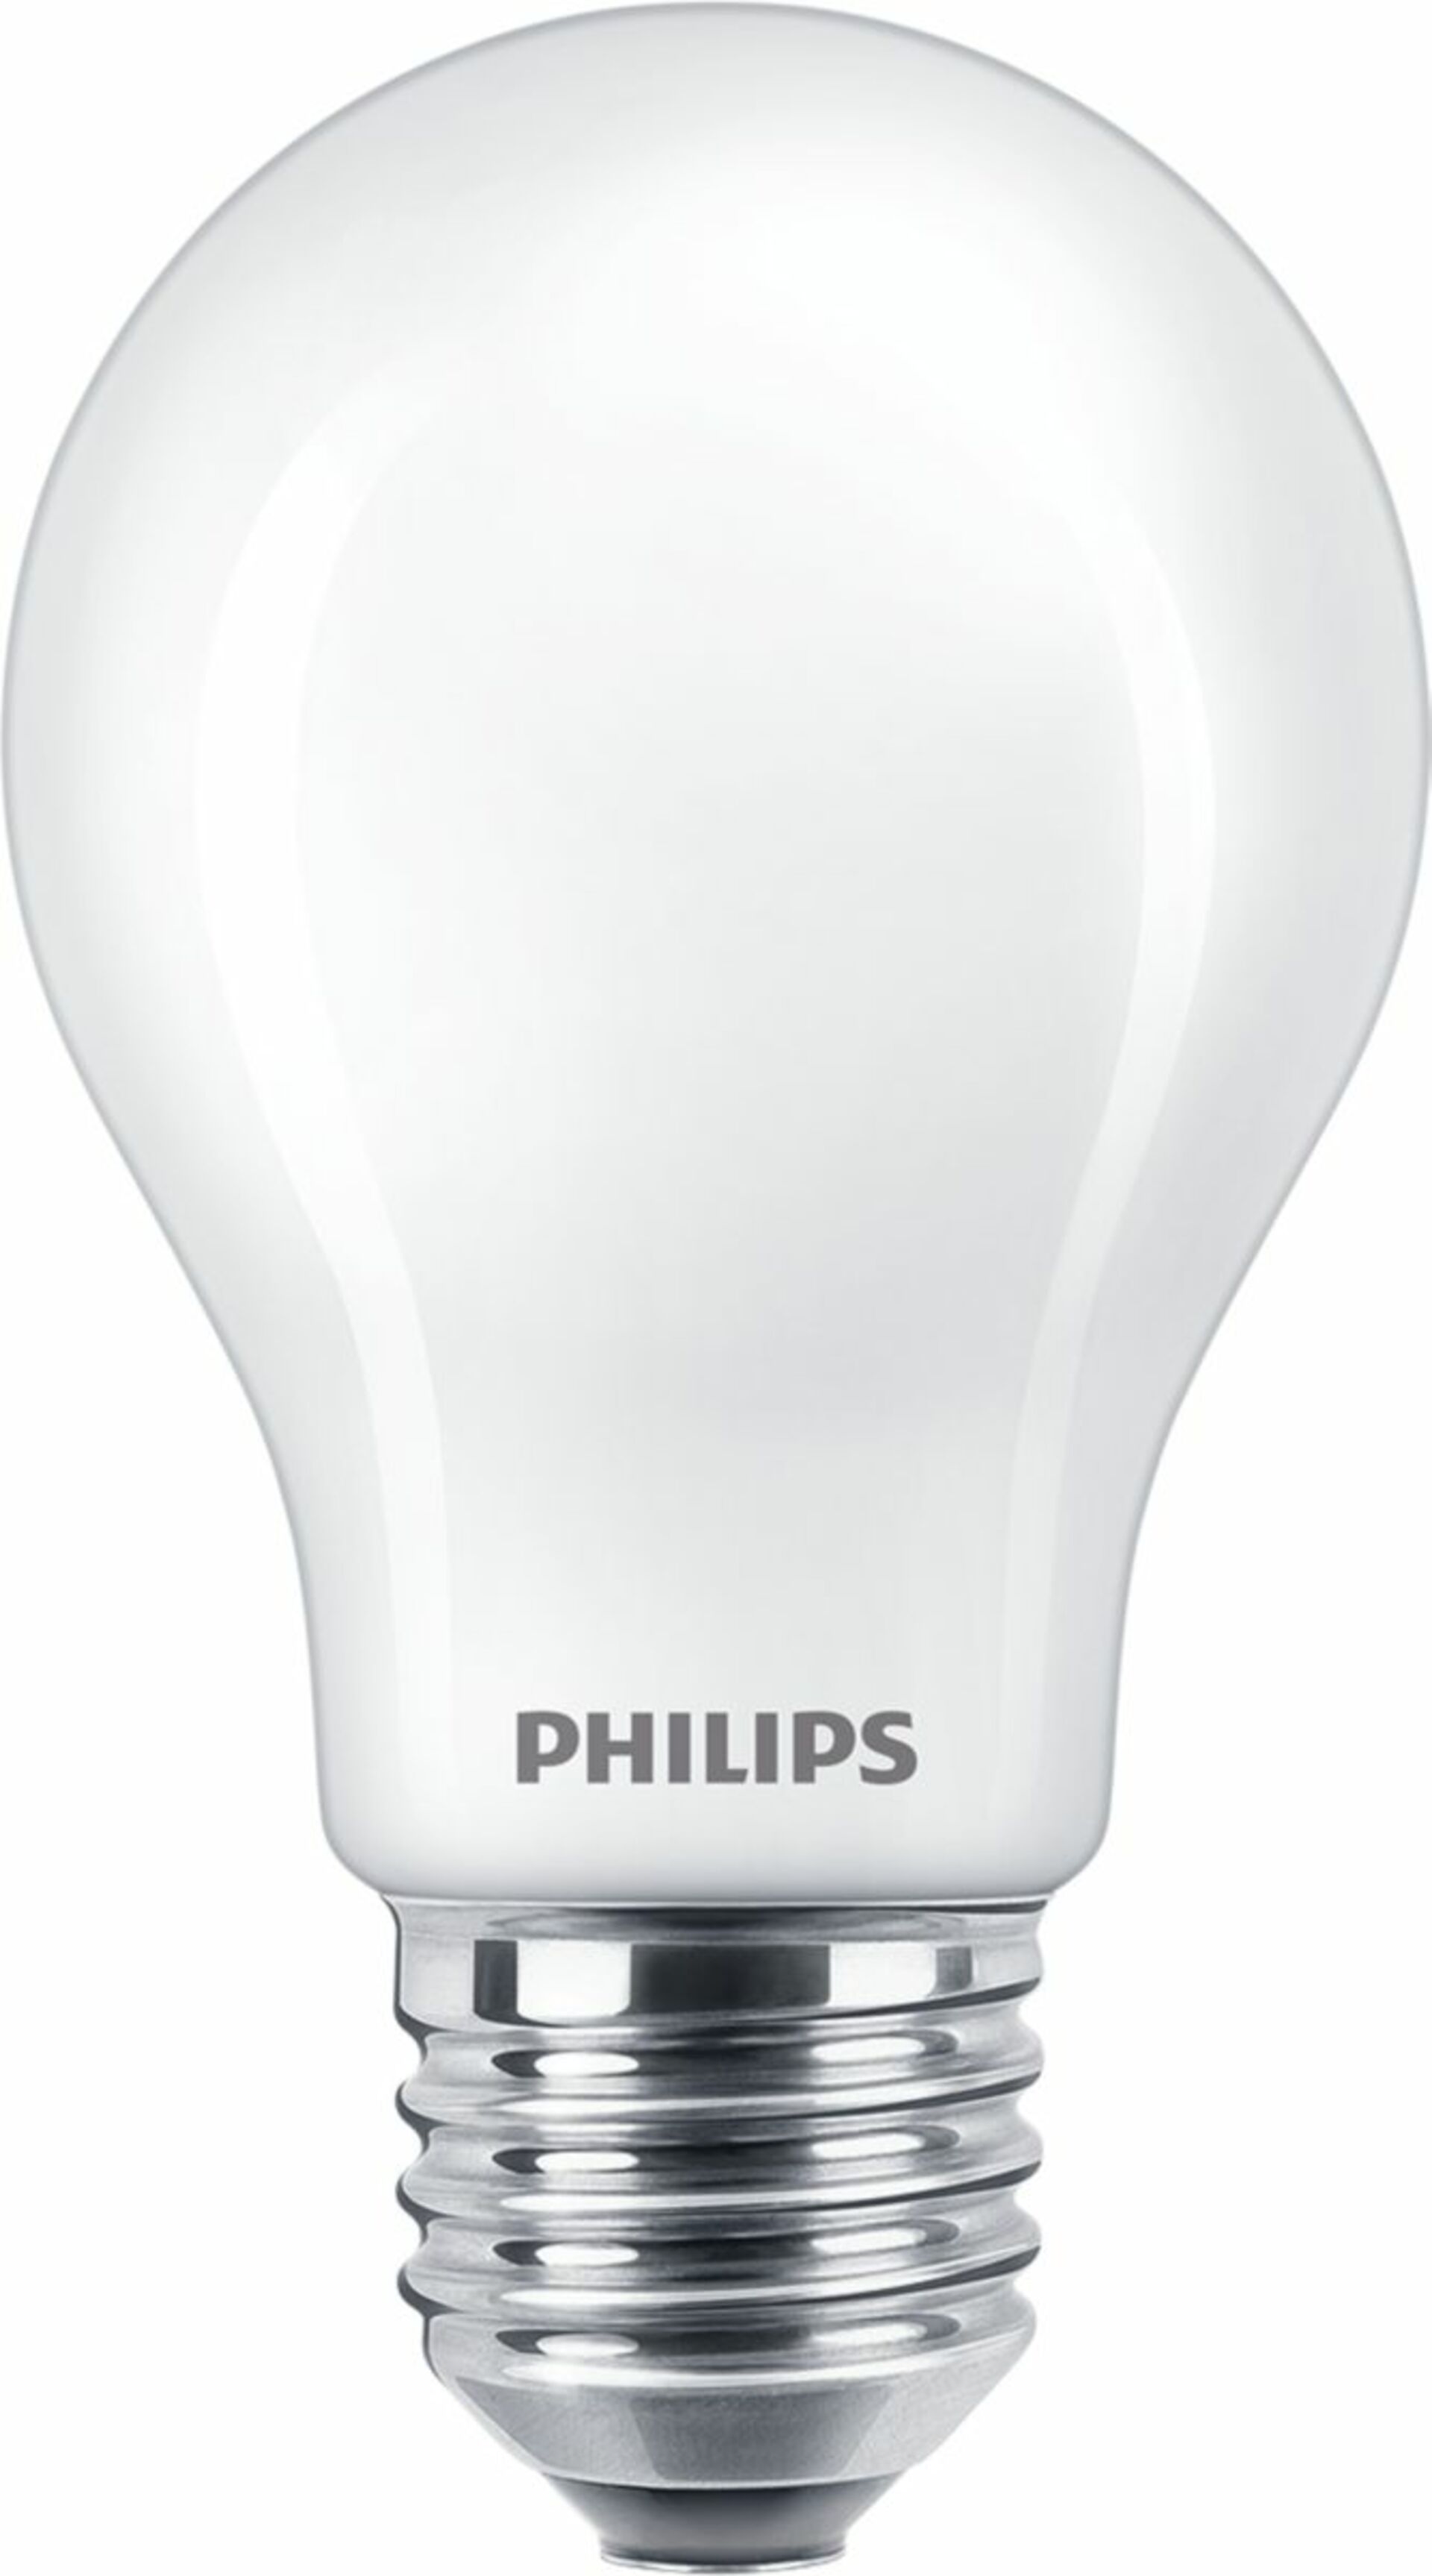 Philips MASTER LEDBulb DT 7.2-75W E27 927 A60 FROSTED GLASS